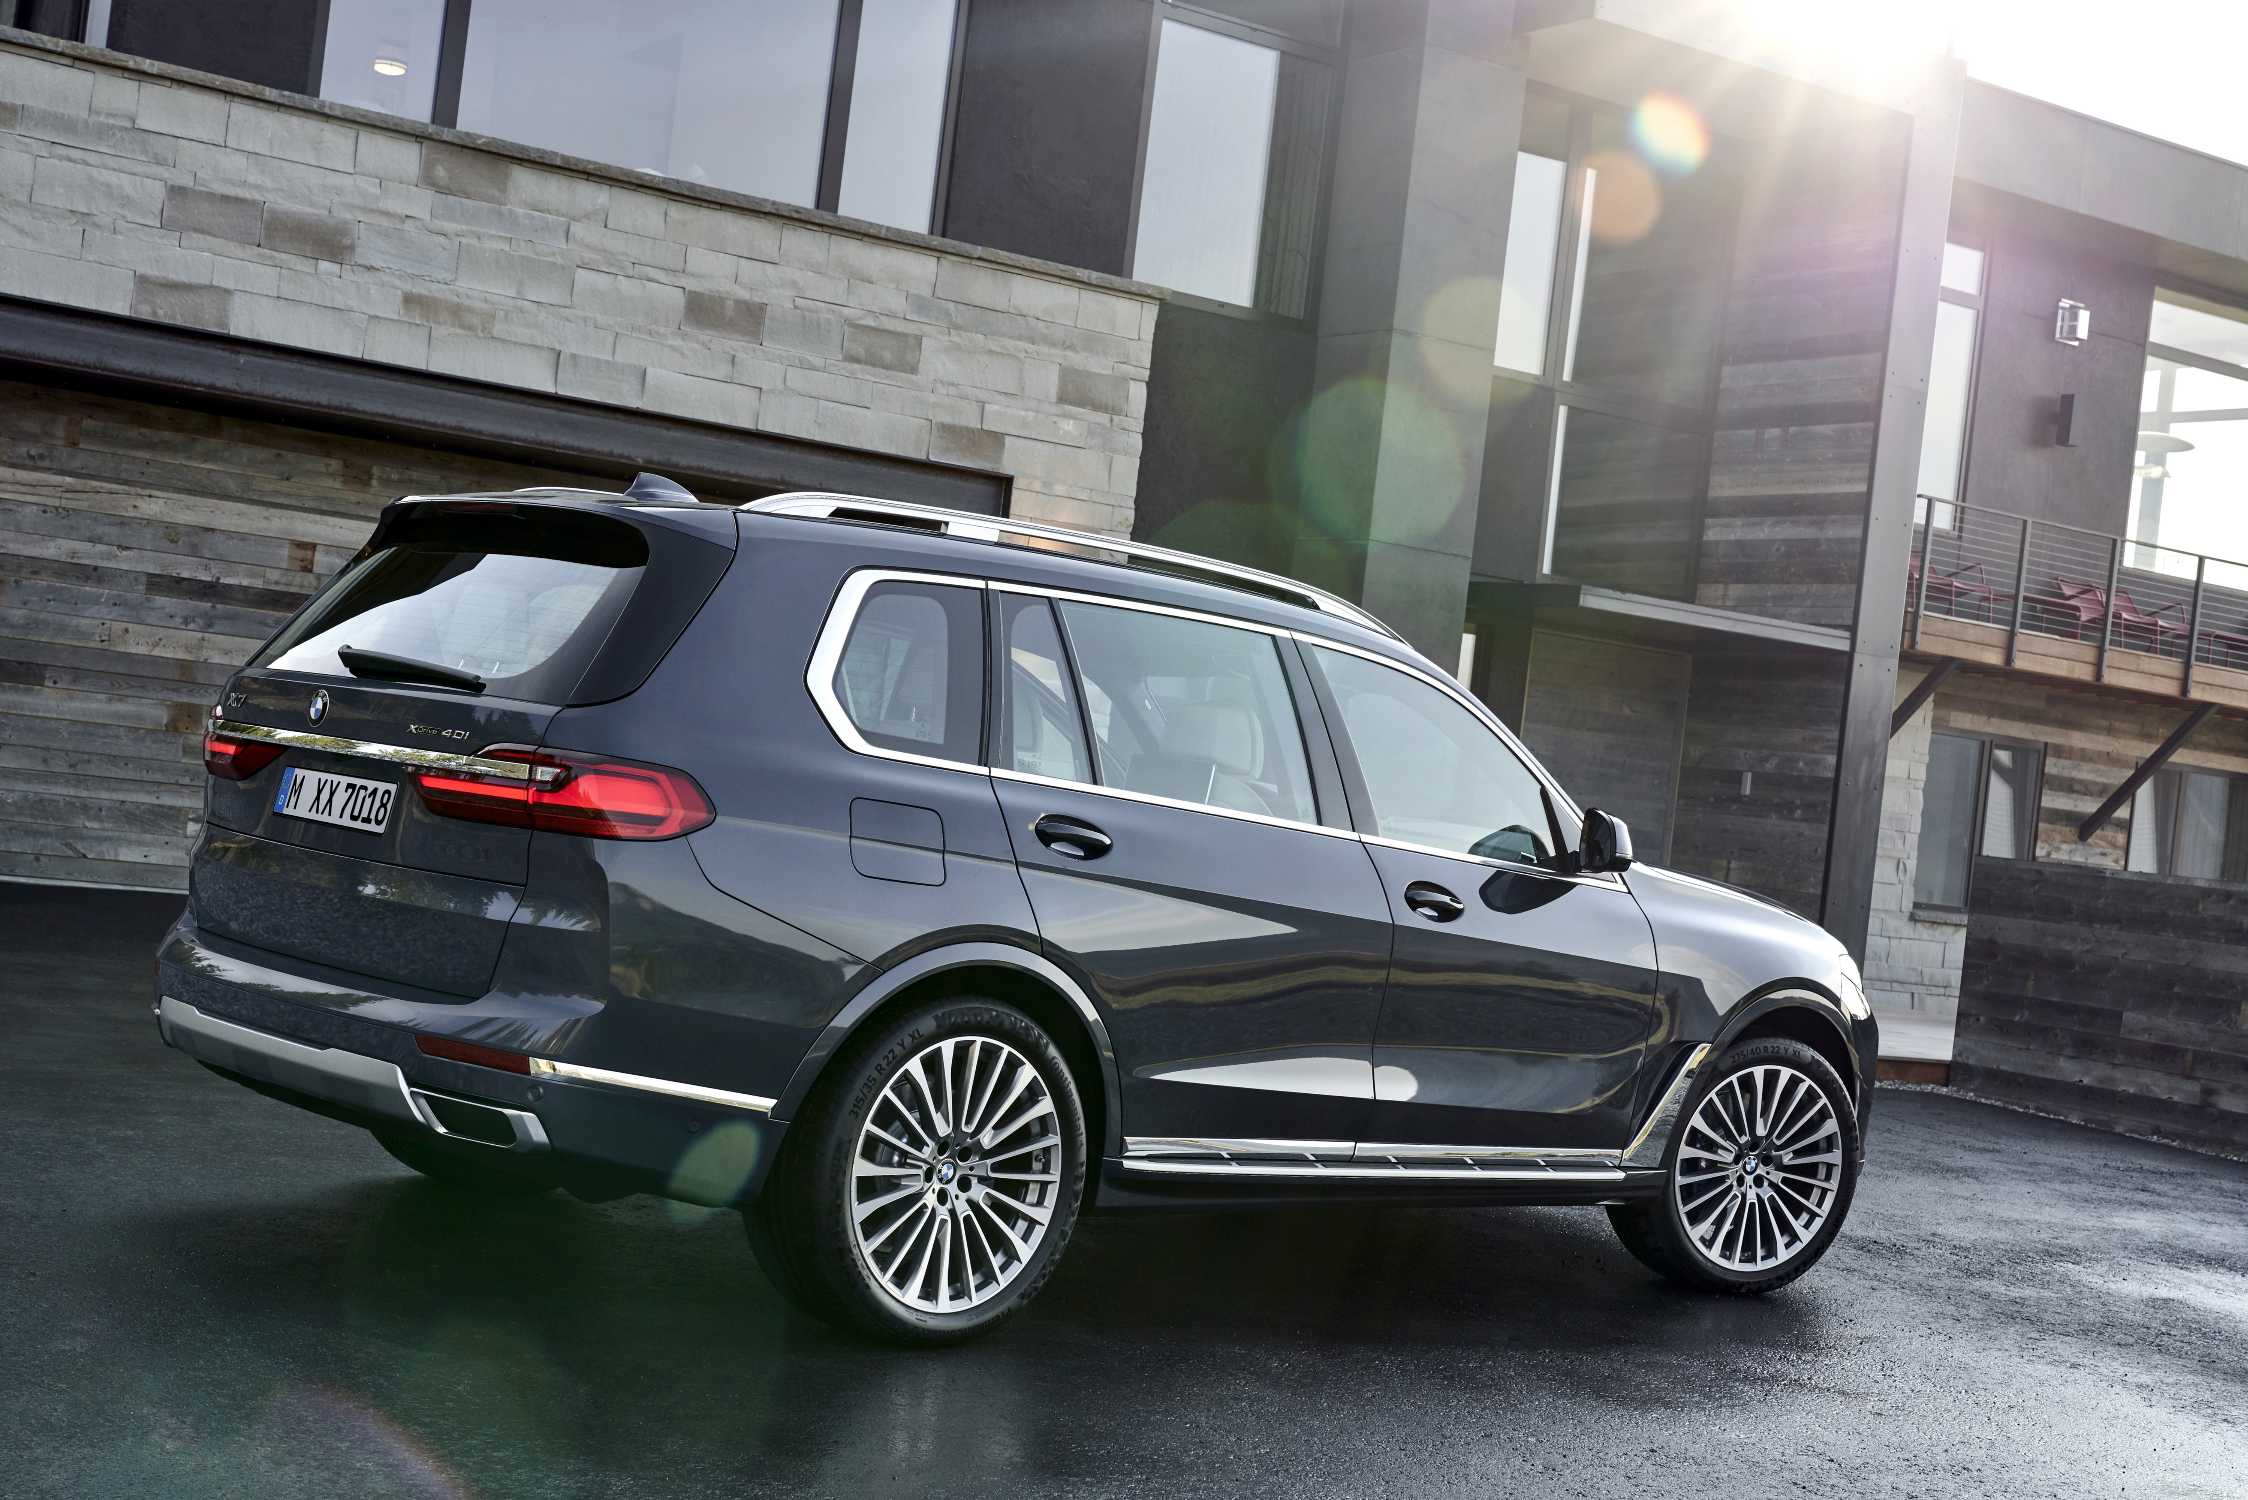 The first-ever BMW X7 with Design Pure Excellence in Arctic Grey, light alloy wheels styling 757 (10/2018).